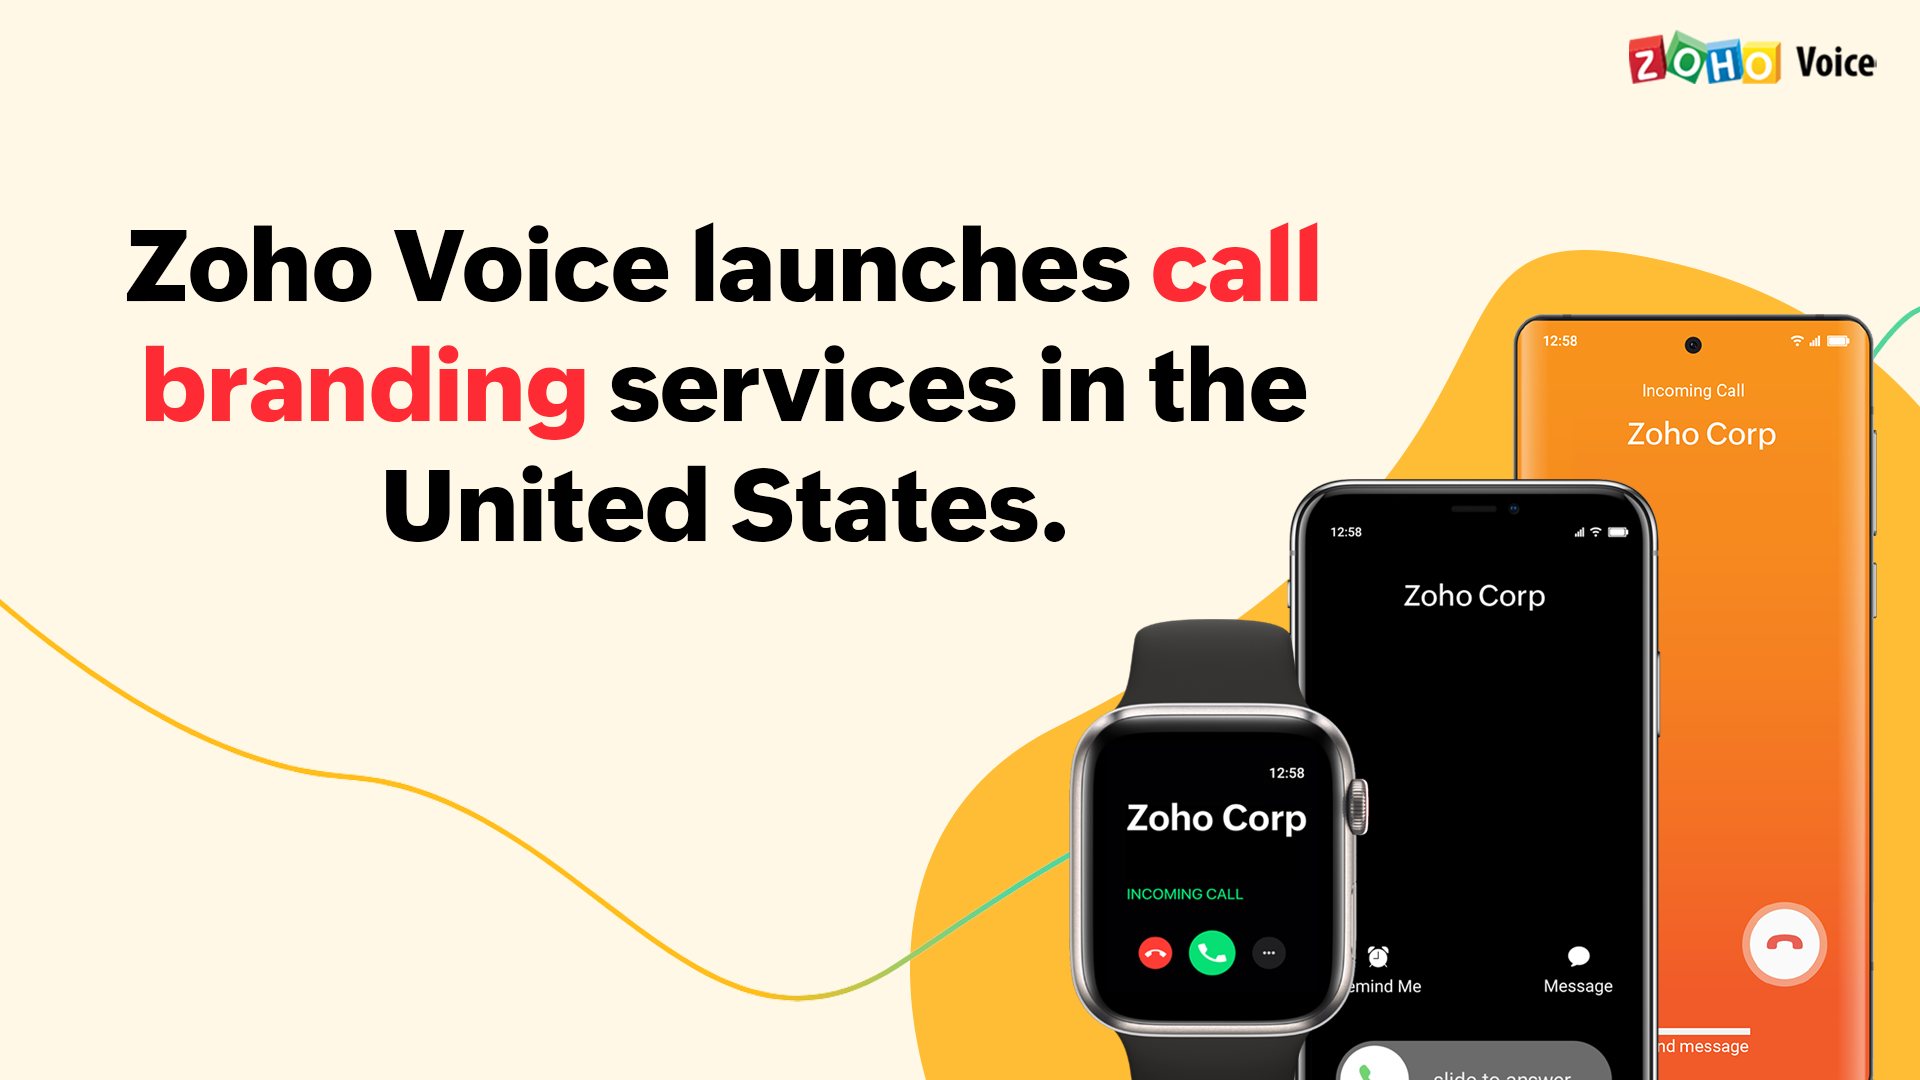 Elevate your business identity and authenticity with Zoho Voice's call branding services